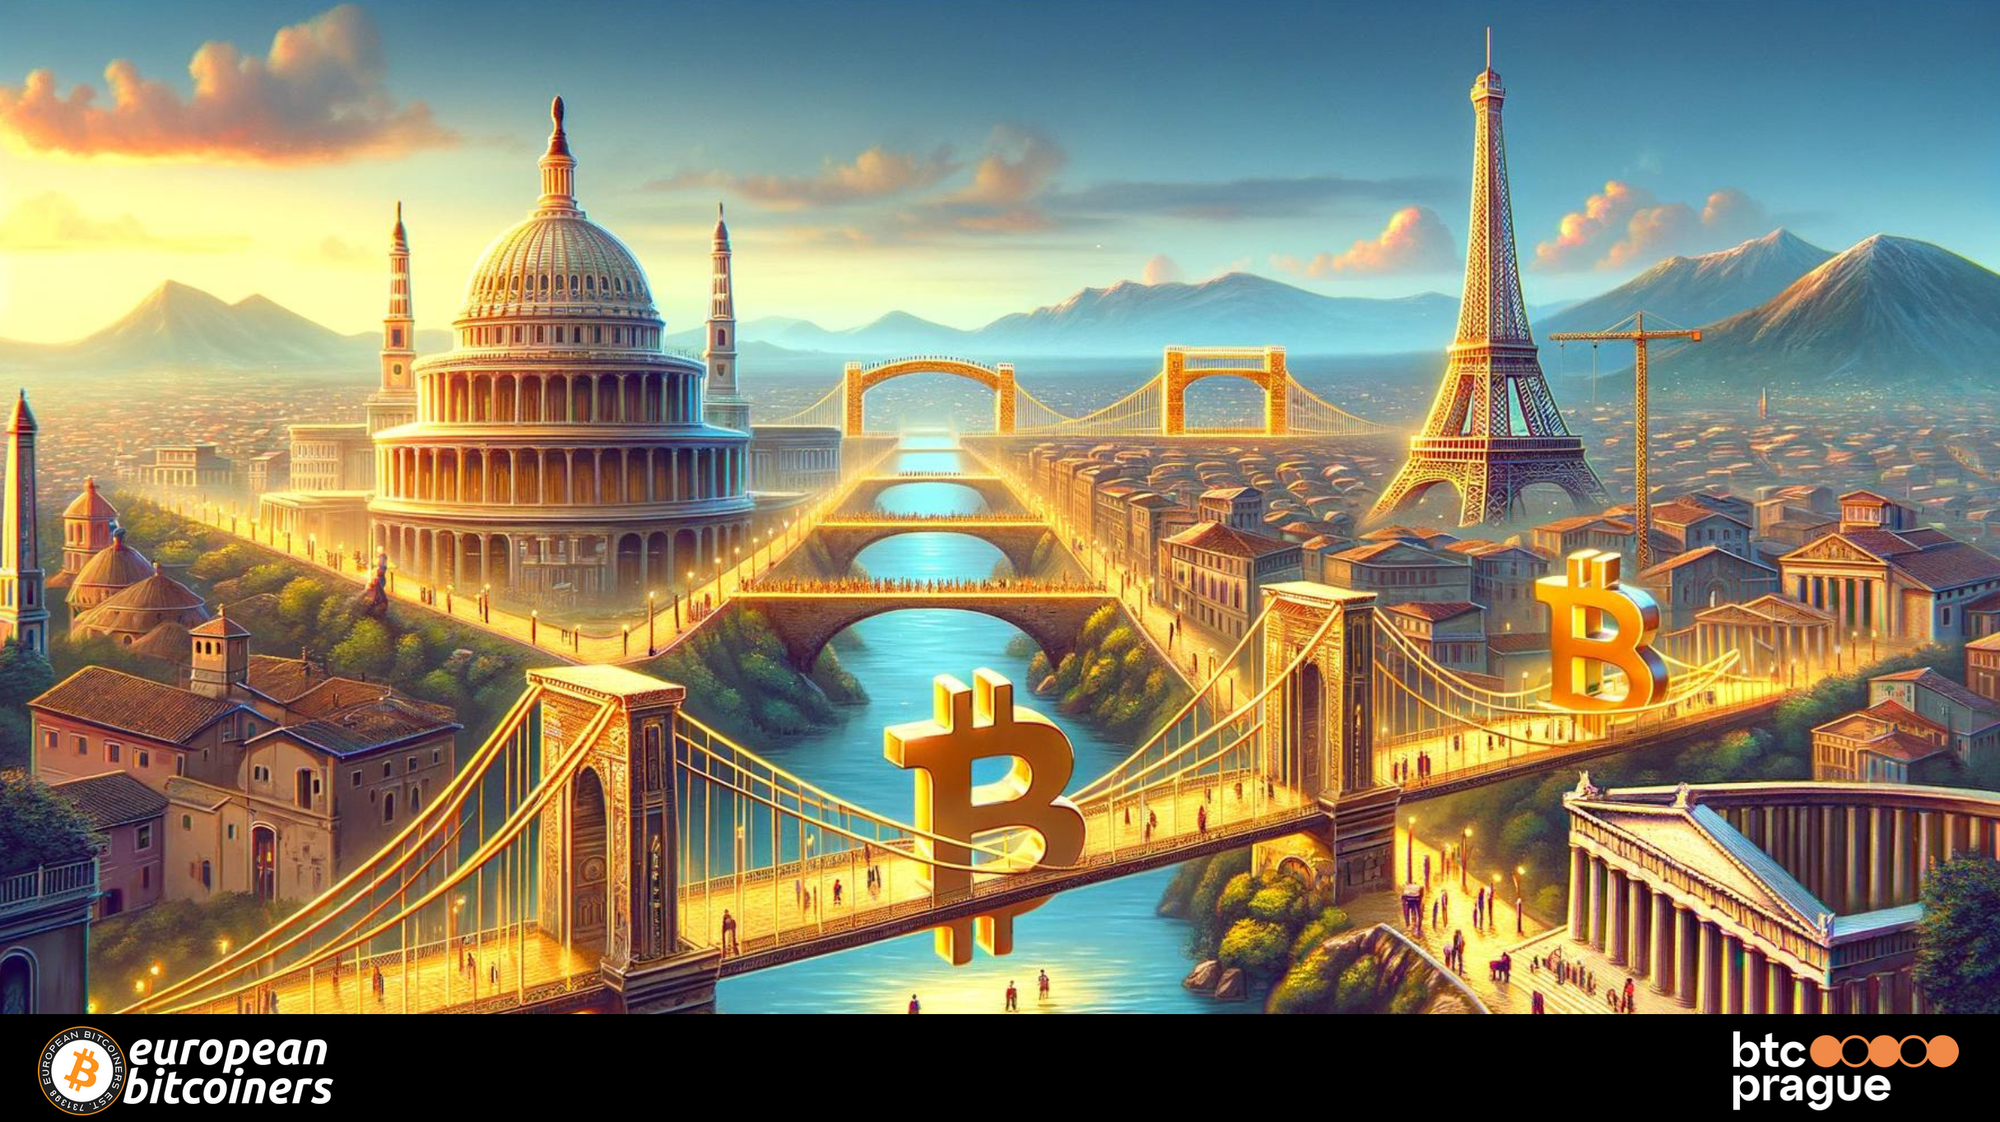 Building Bitcoin Bridges: Uniting Europe for Financial Freedom